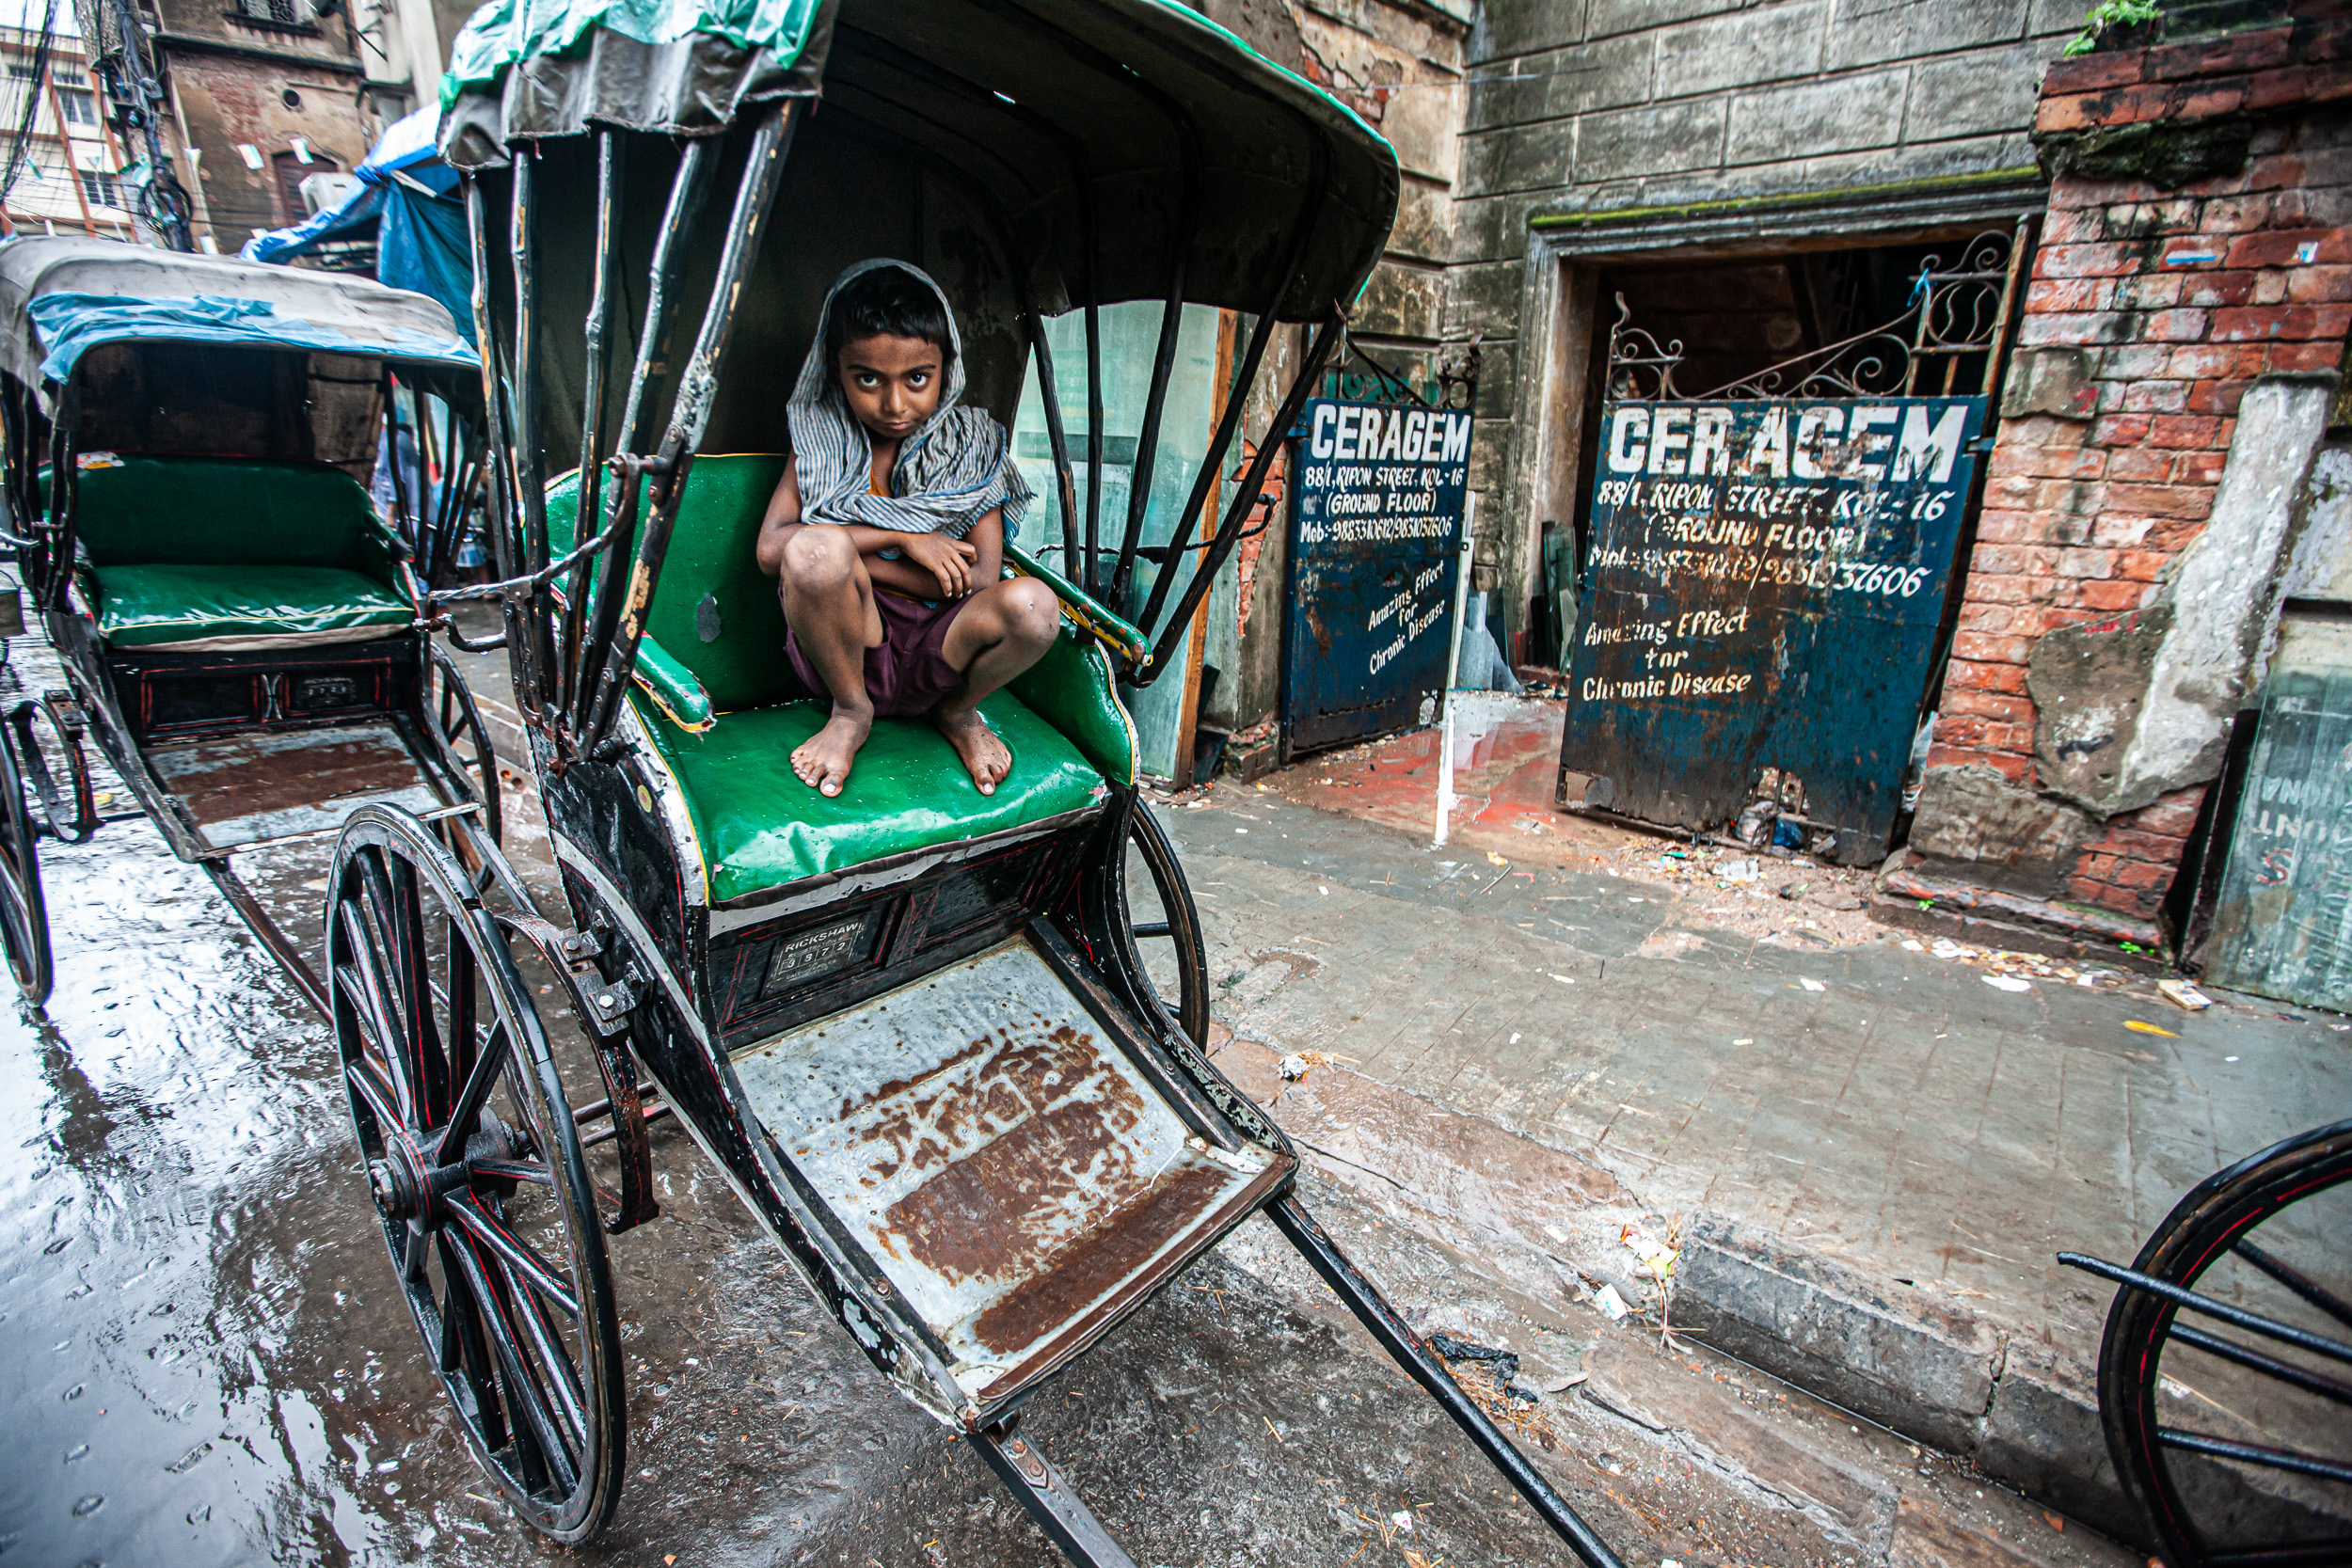  When not in use a rickshaw makes a handy restingplace. 